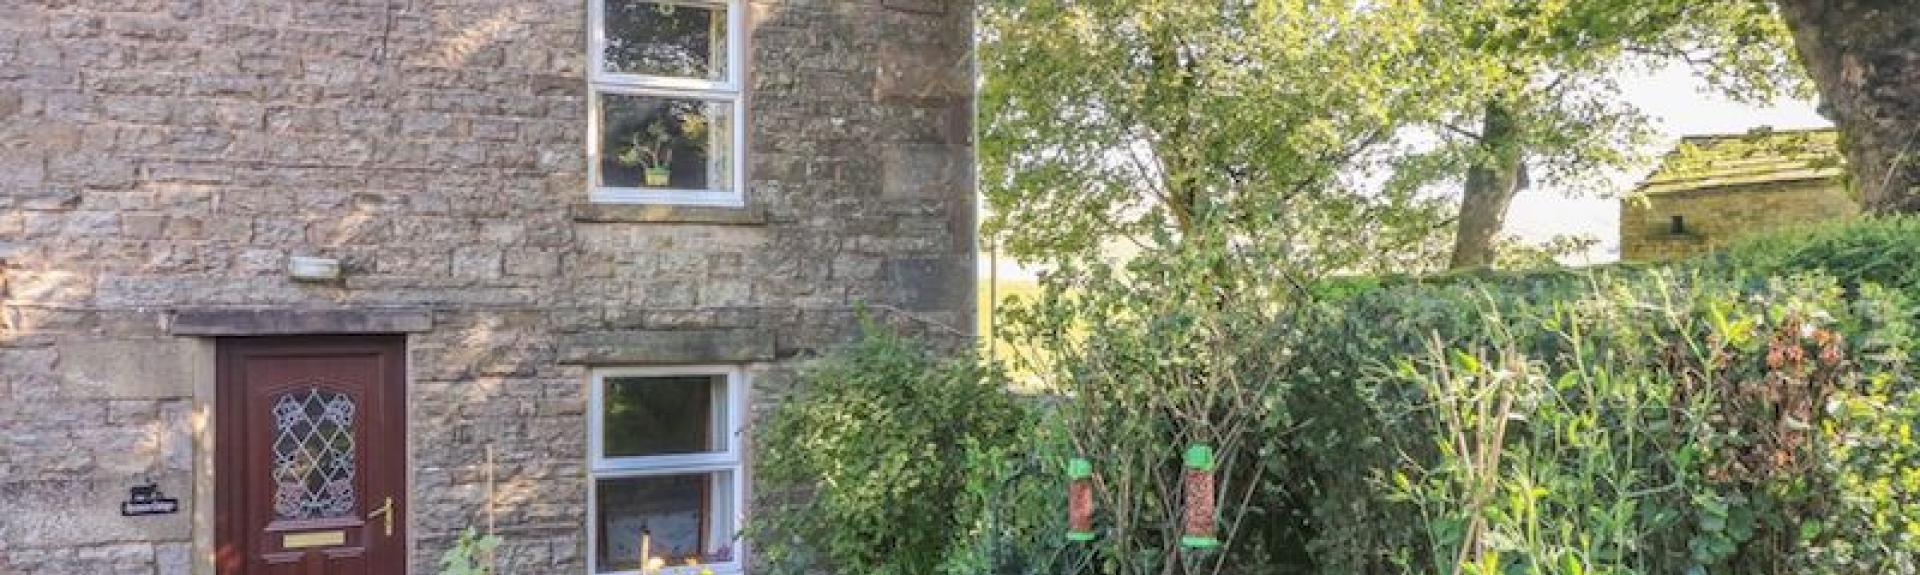 A stone built country cottage in the Yorkshire Dales overlooks a mature garden with flowering poppie.